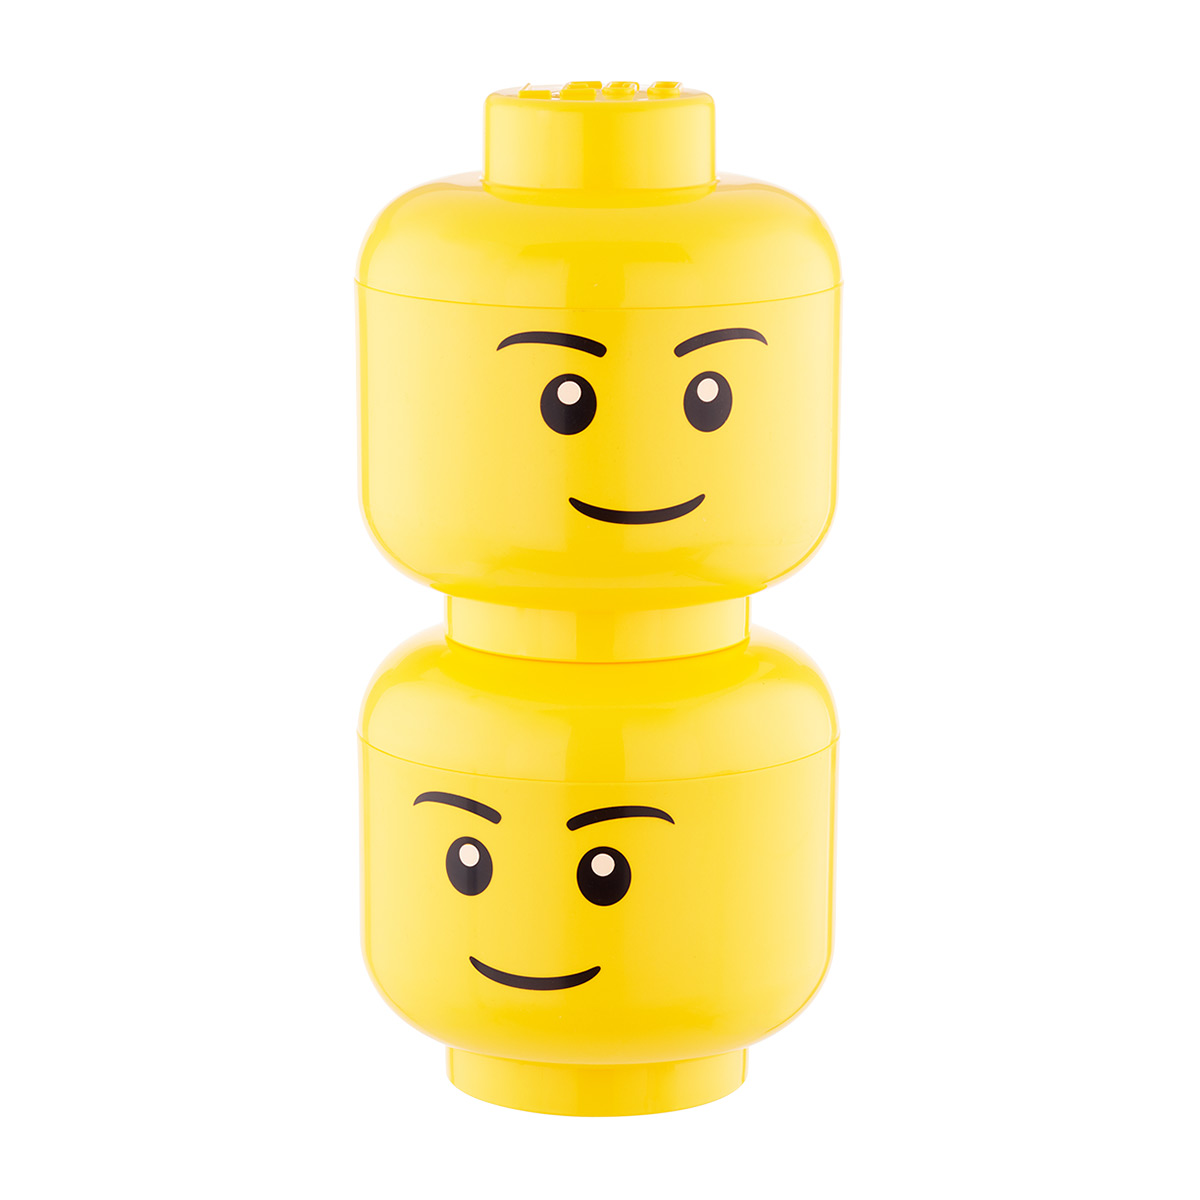 LEGO Heads | The